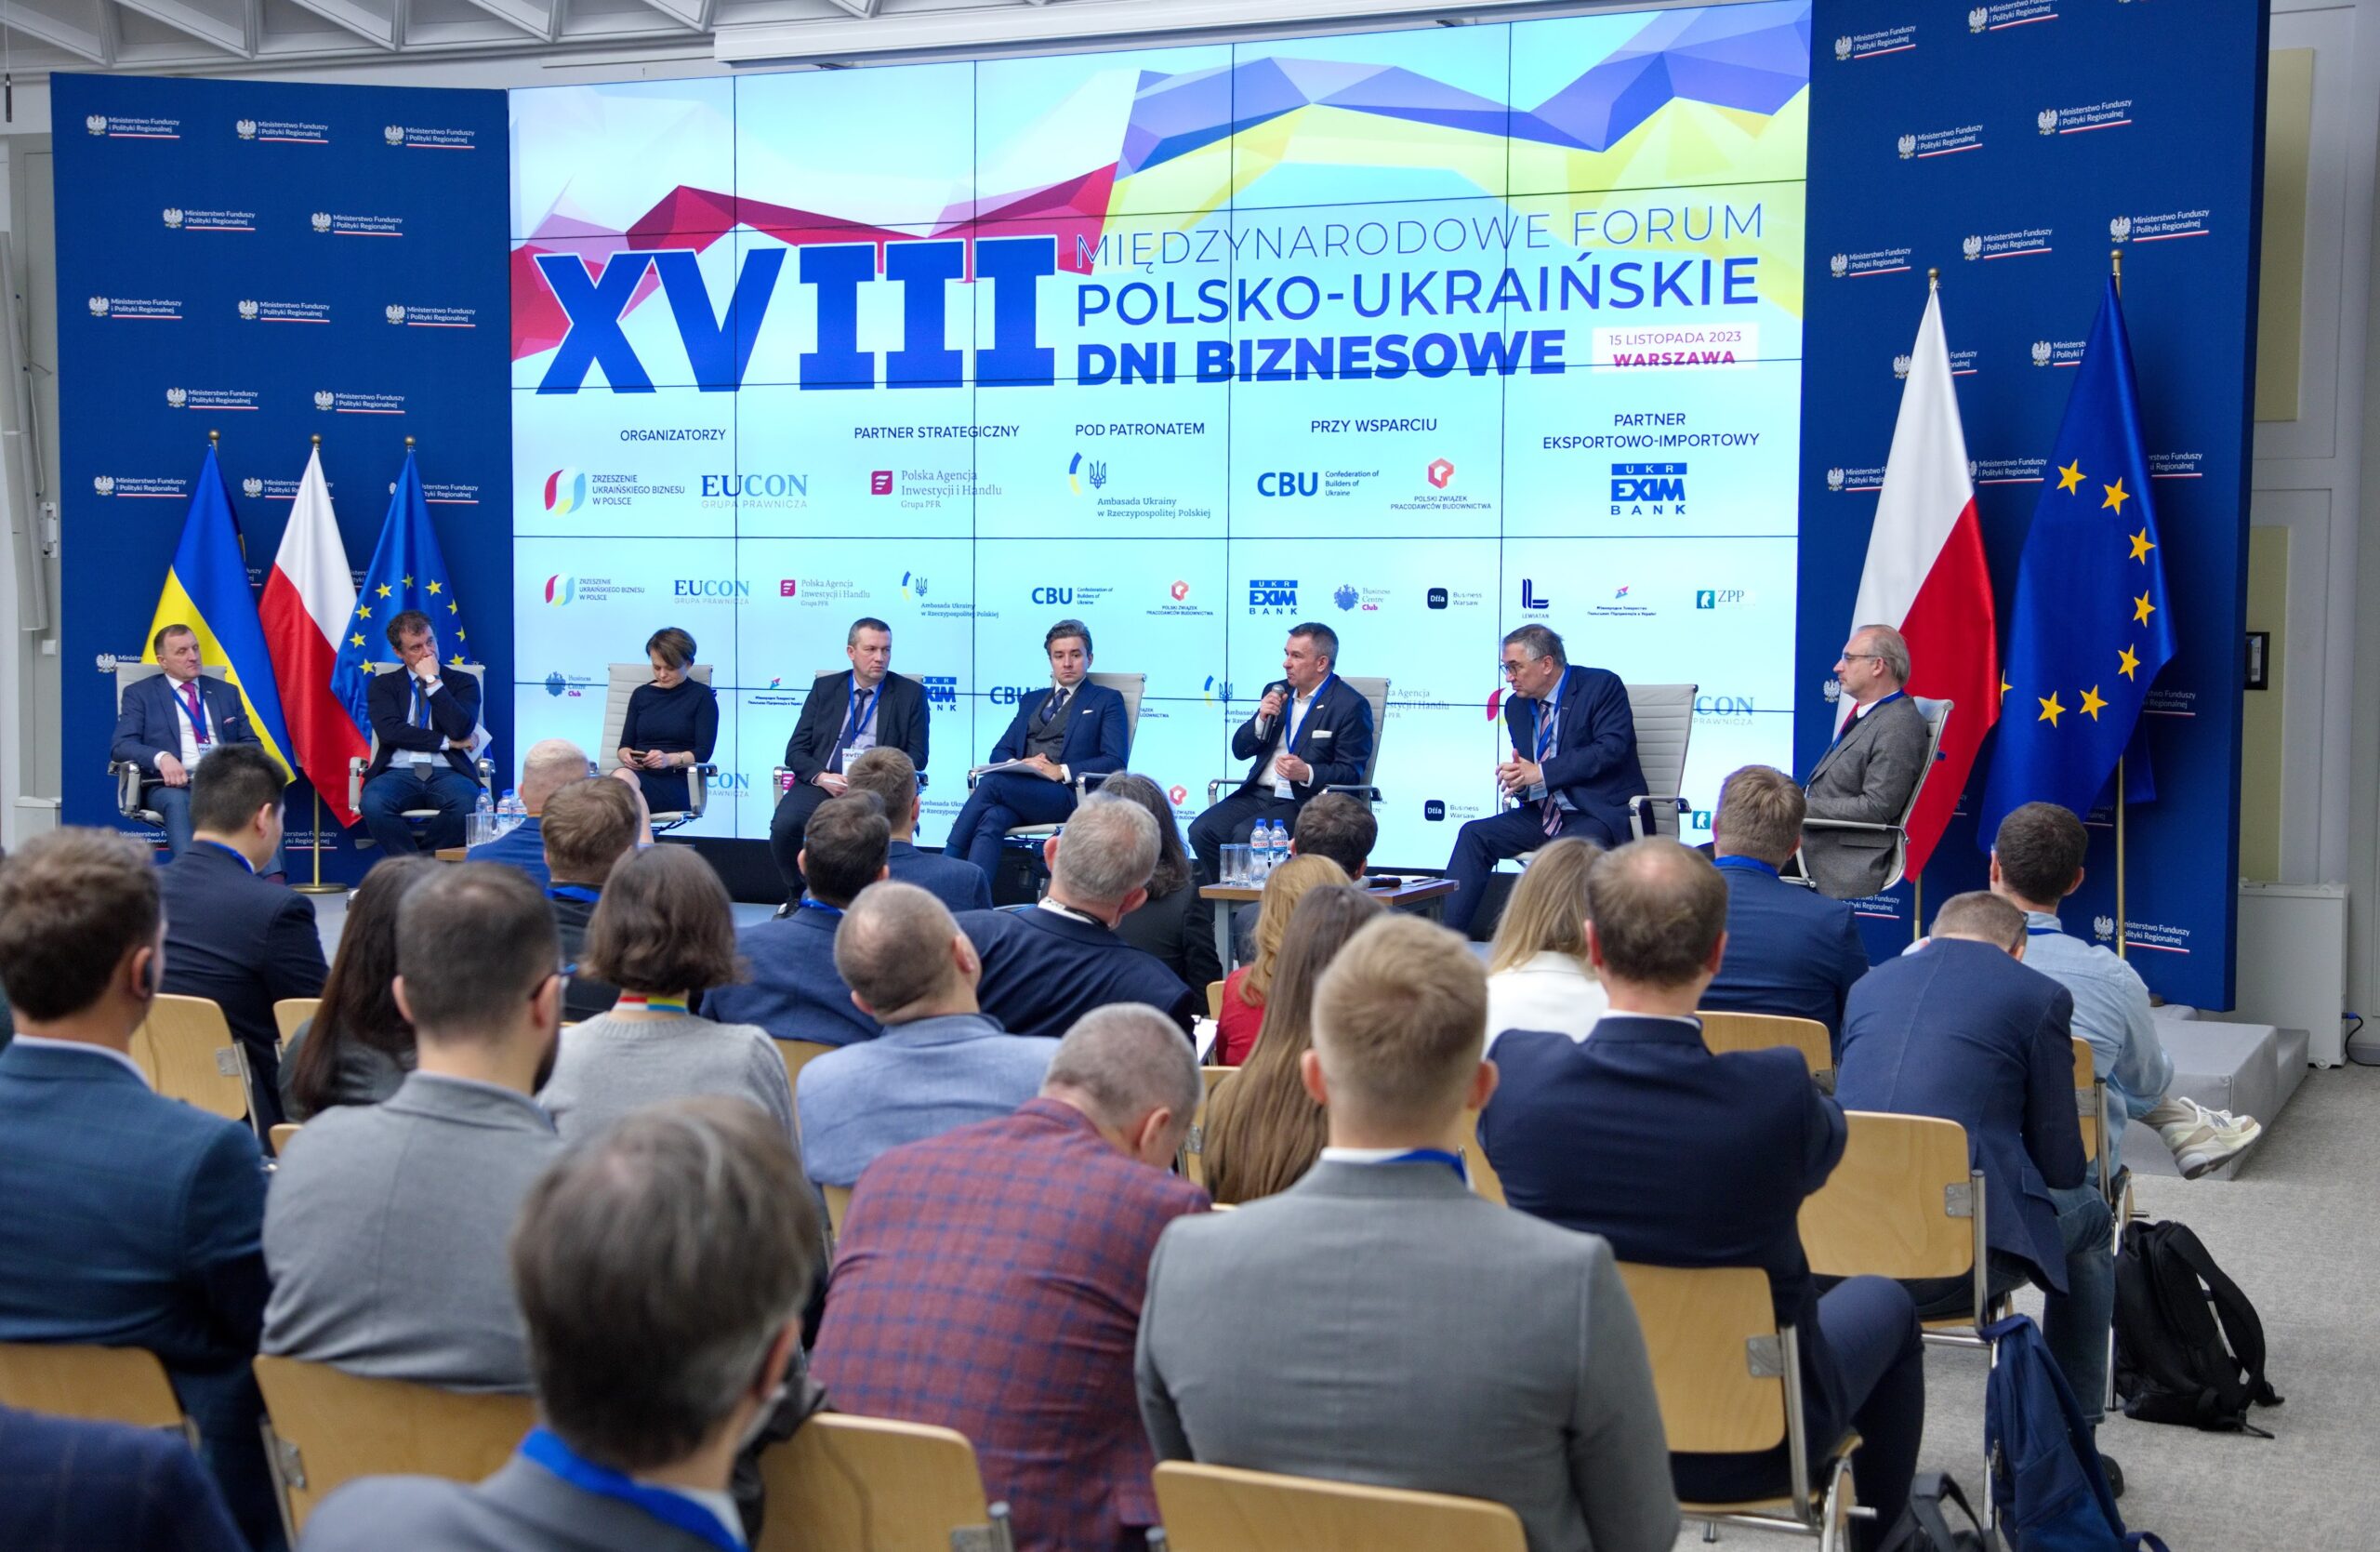 From challenges to common solutions: The XVIII International Forum “Polish-Ukrainian Business Days” took place in Warsaw on 15 November